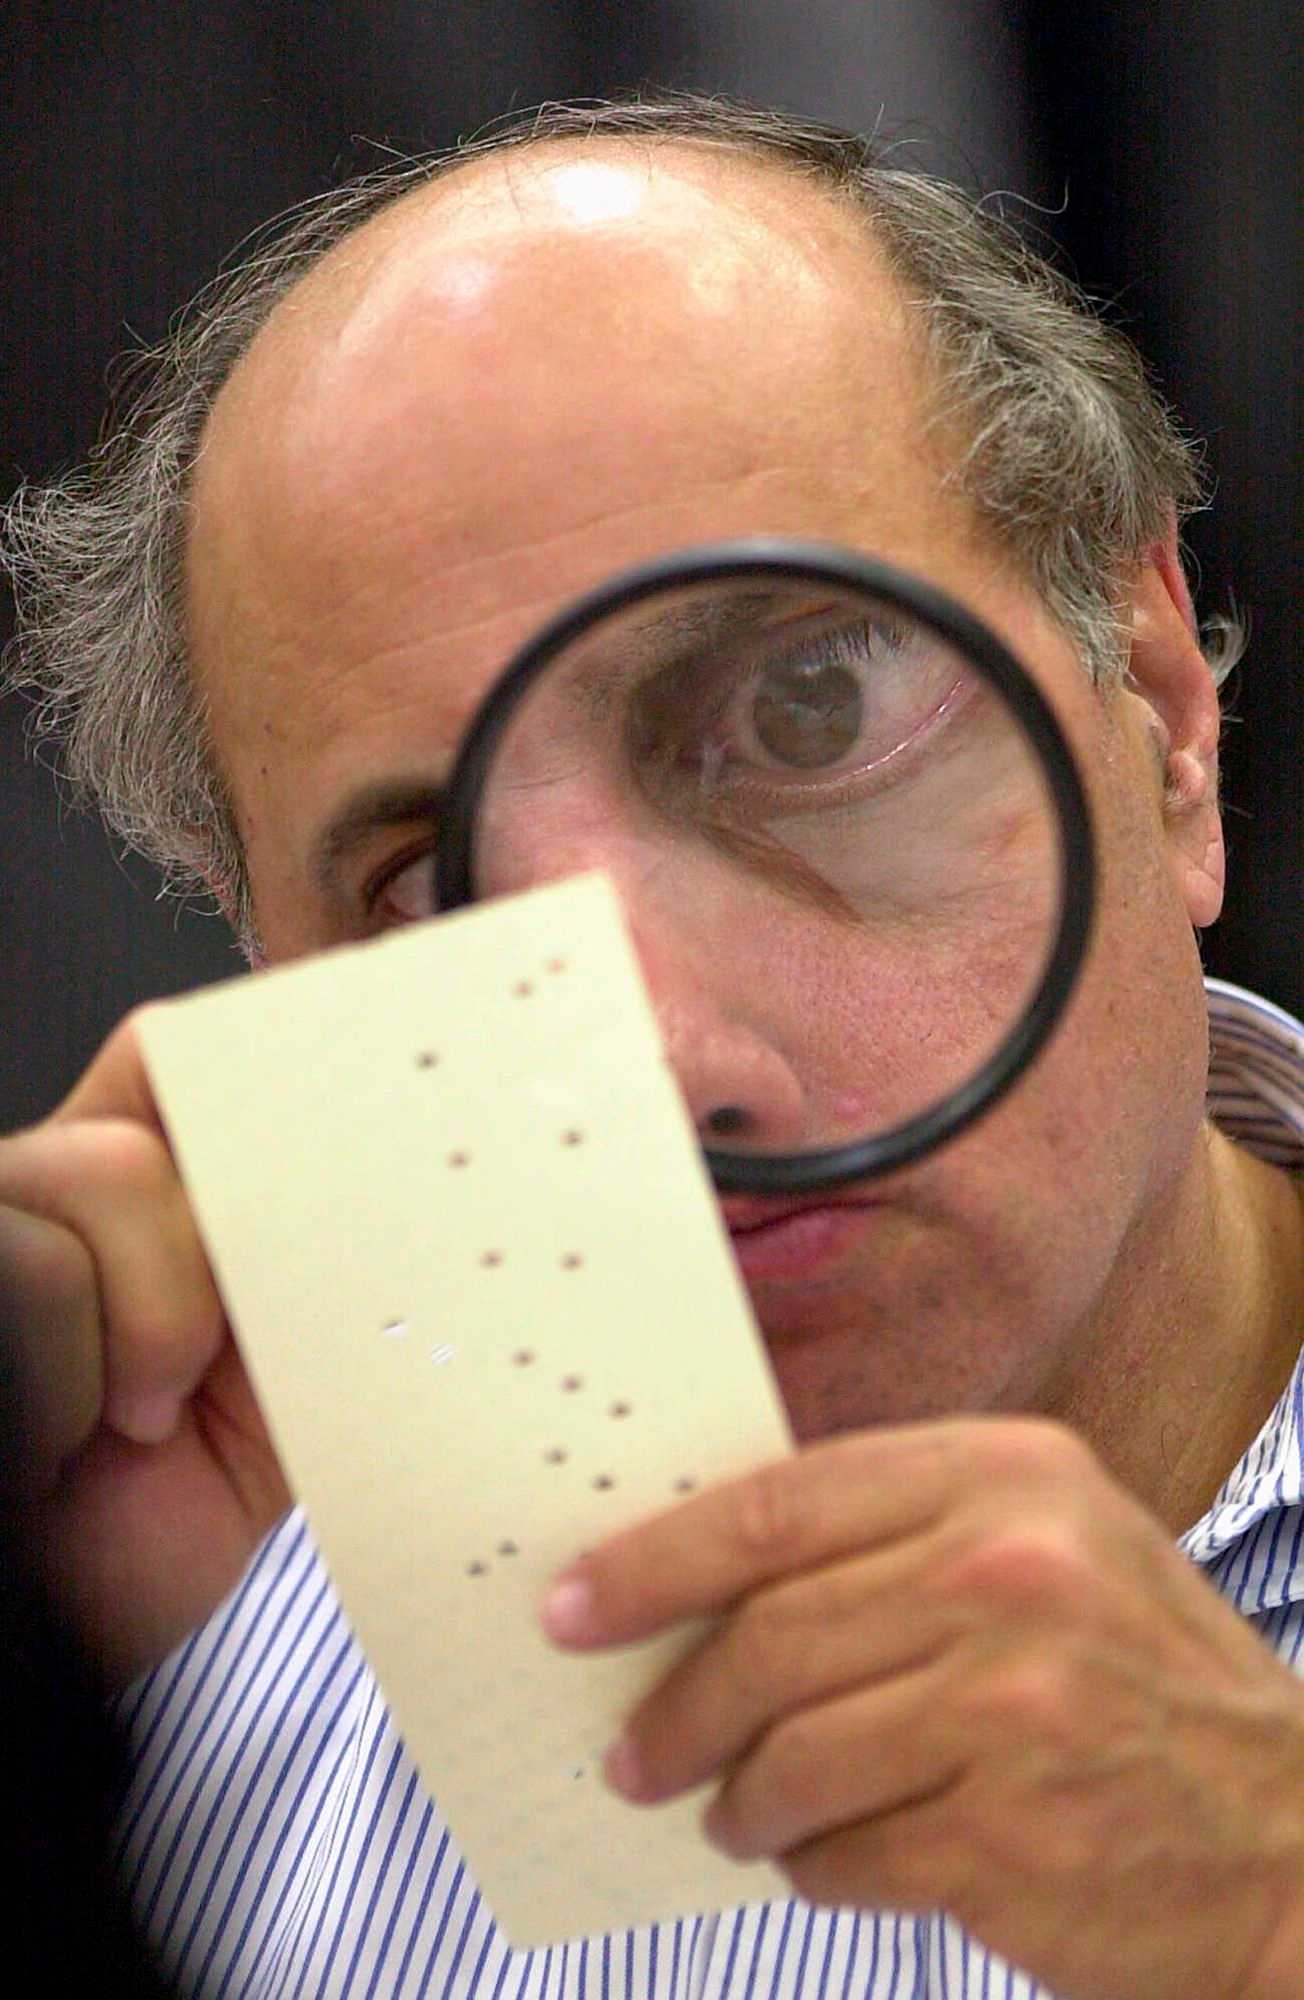 Judge Robert Rosenberg, a member of the Broward County, Fla., canvassing board, used a magnifying glass to examine a disputed election ballot in Fort Lauderdale on Nov. 24, 2000.